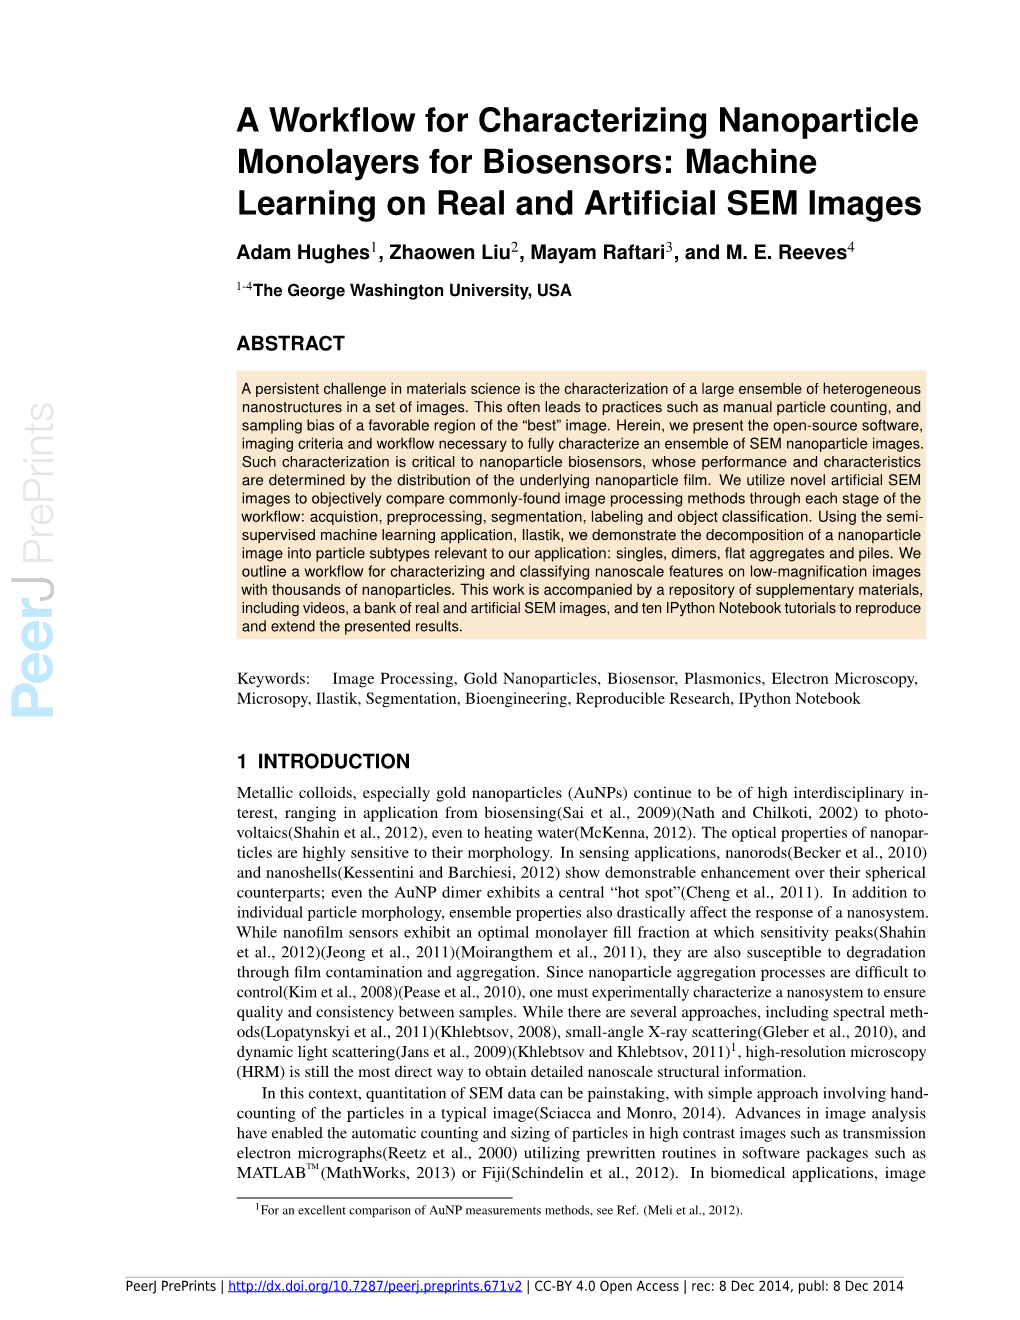 Machine Learning on Real and Artificial SEM Images